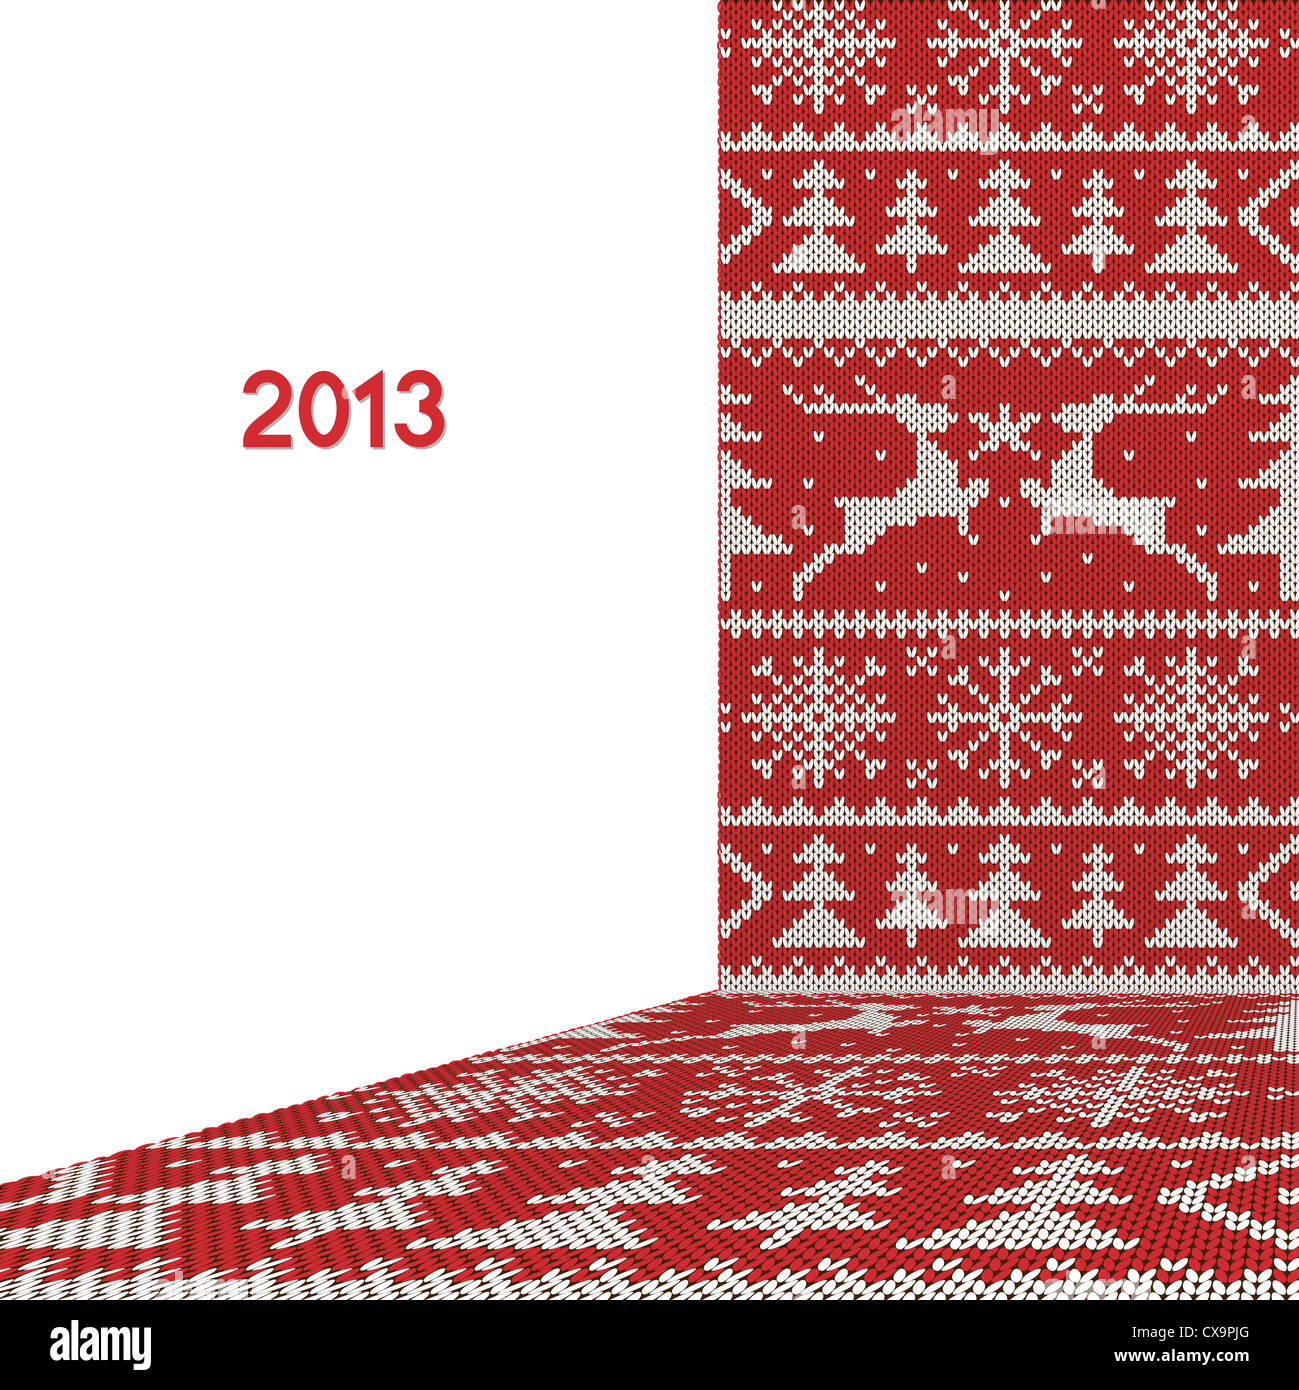 White Christmas ornament on red background. New year knitted fabric Stock Photo